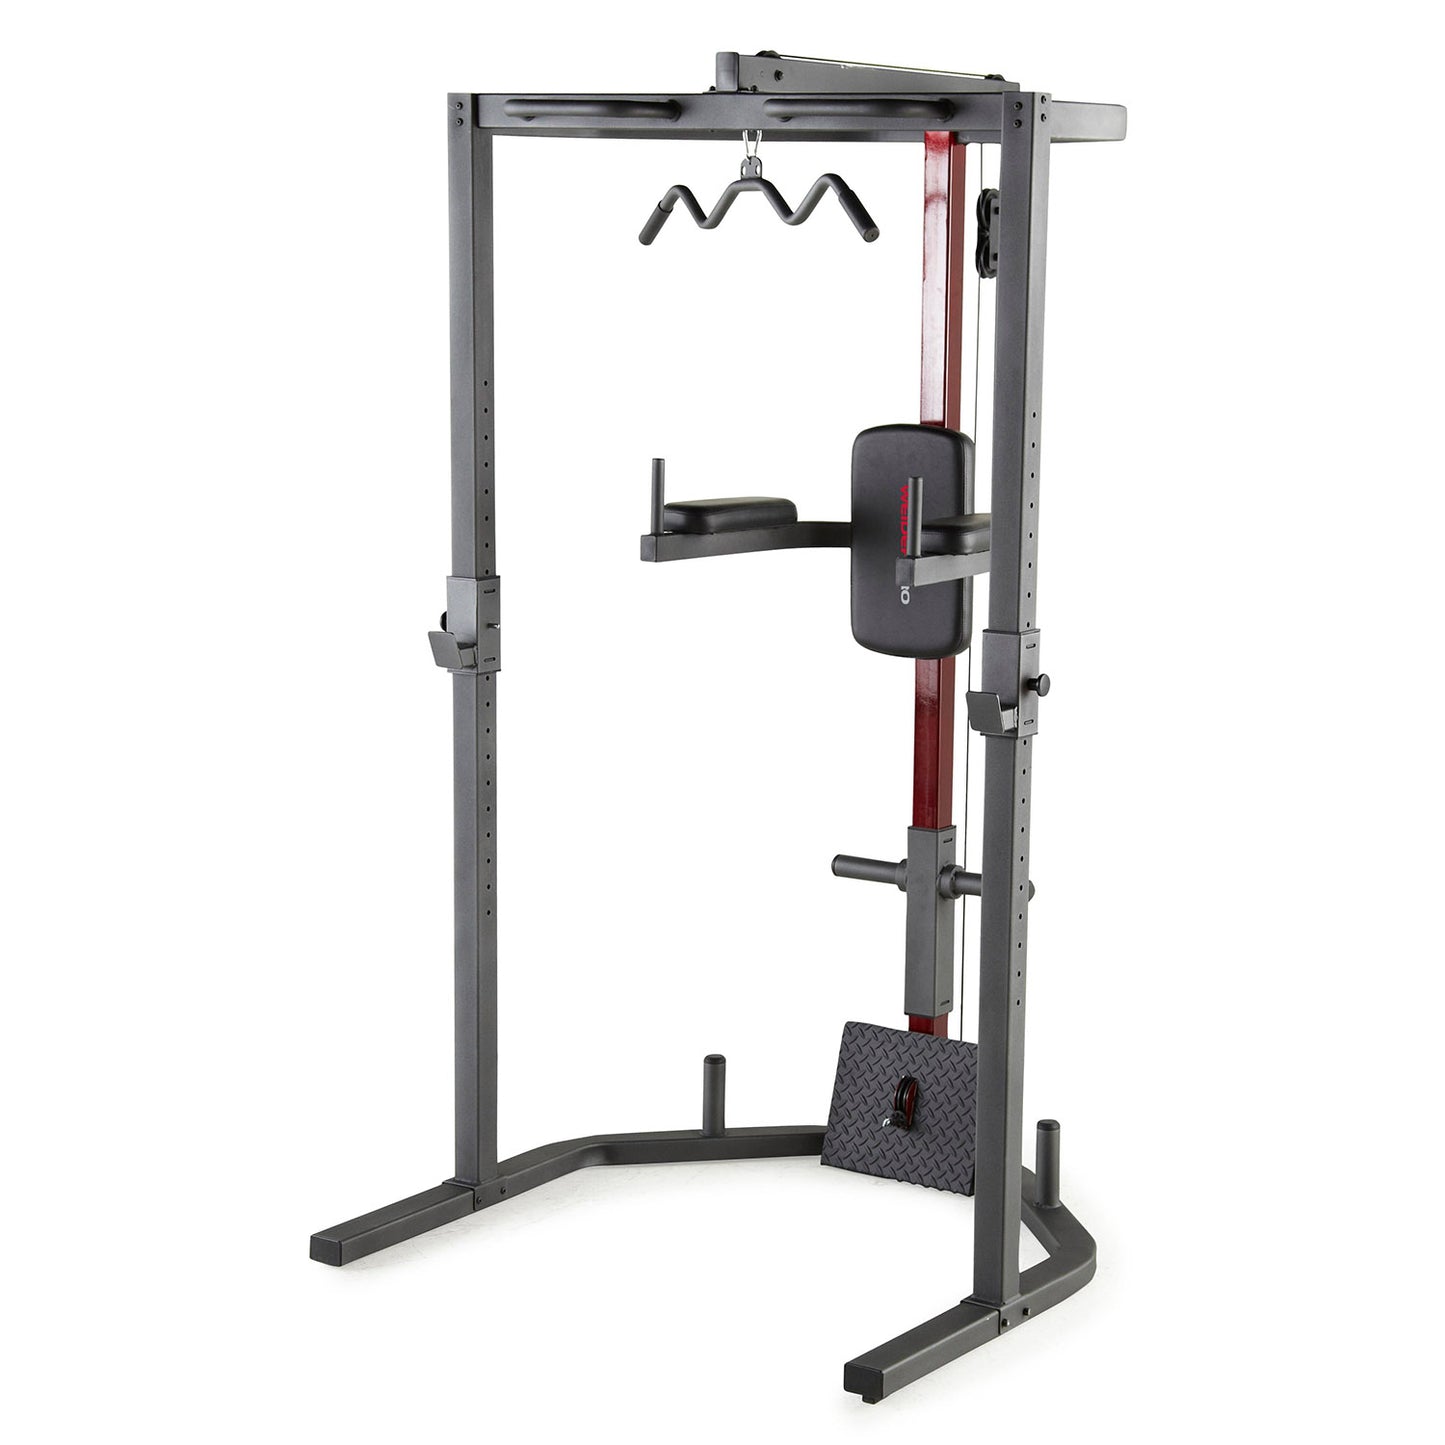 How to Use the Weider Pro Power Stack